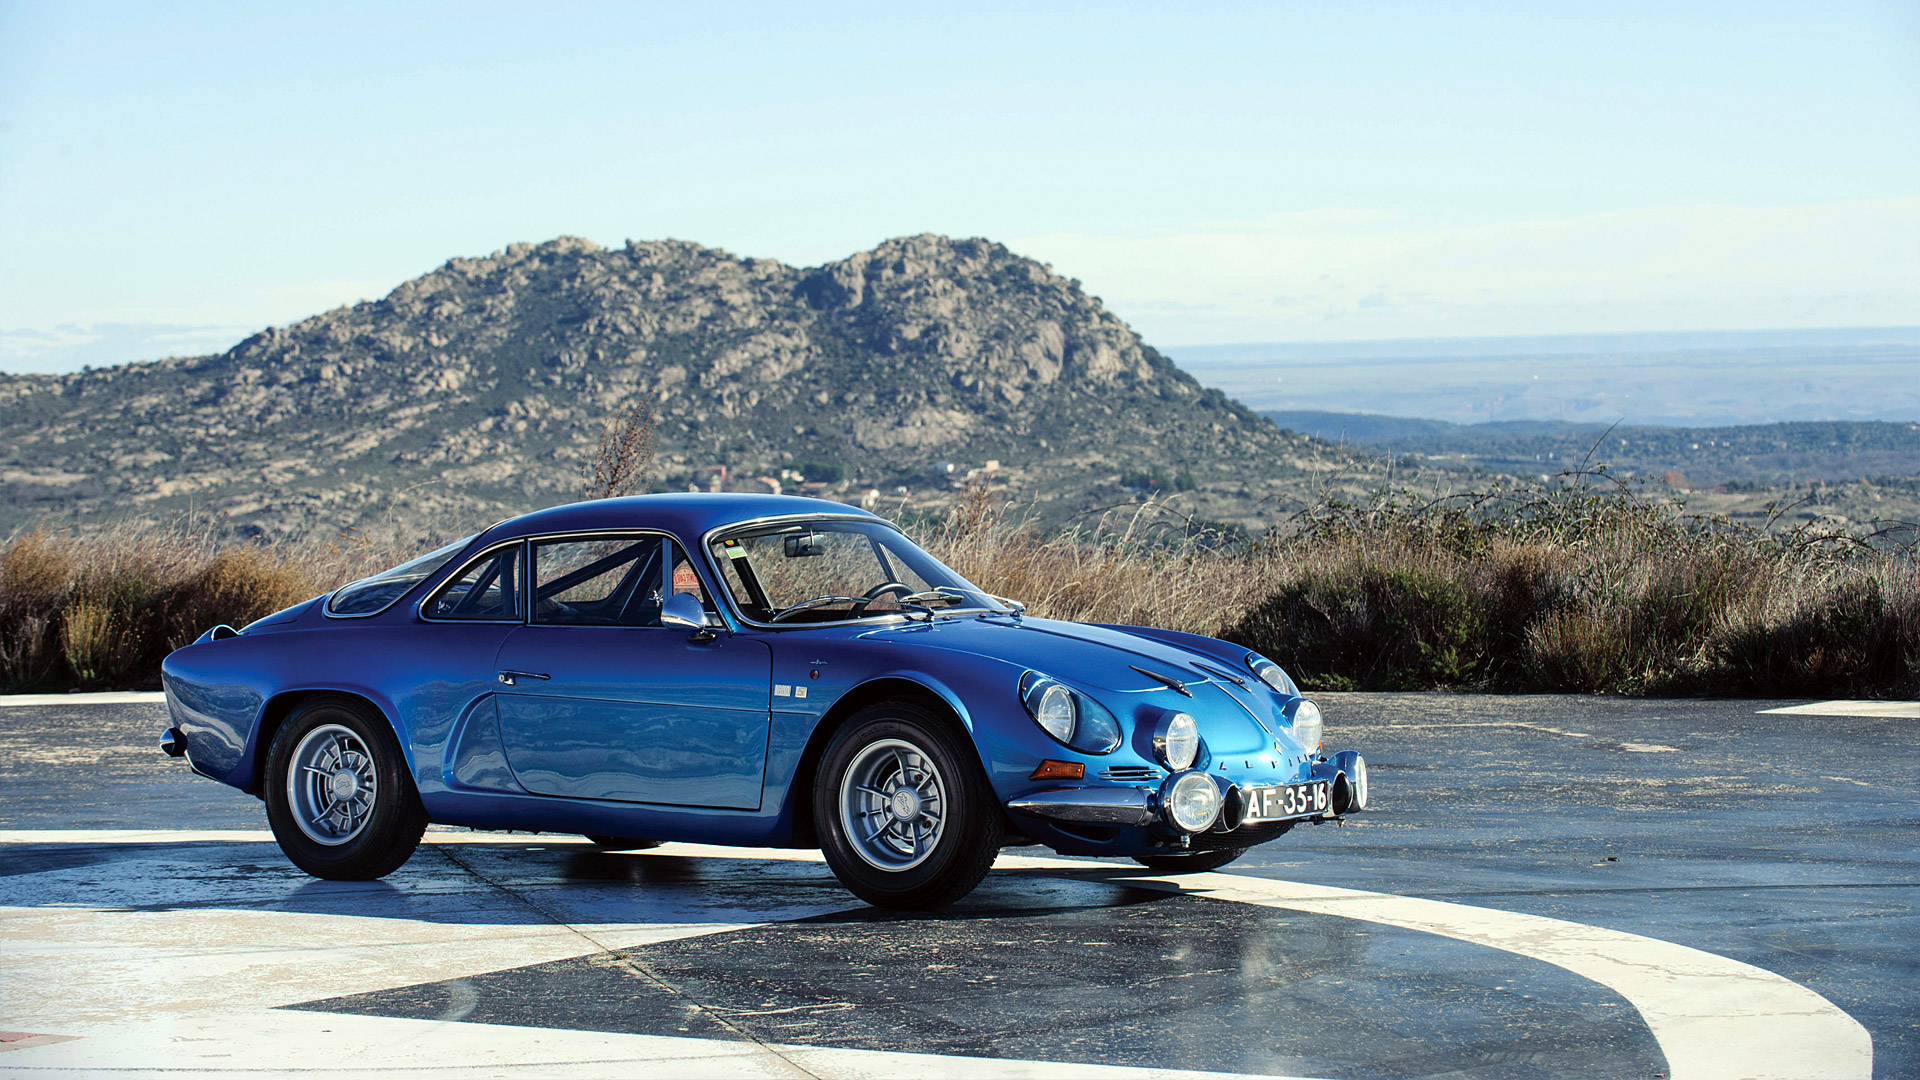 Renault Alpine A110 Wallpaper HD Image Wsupercars